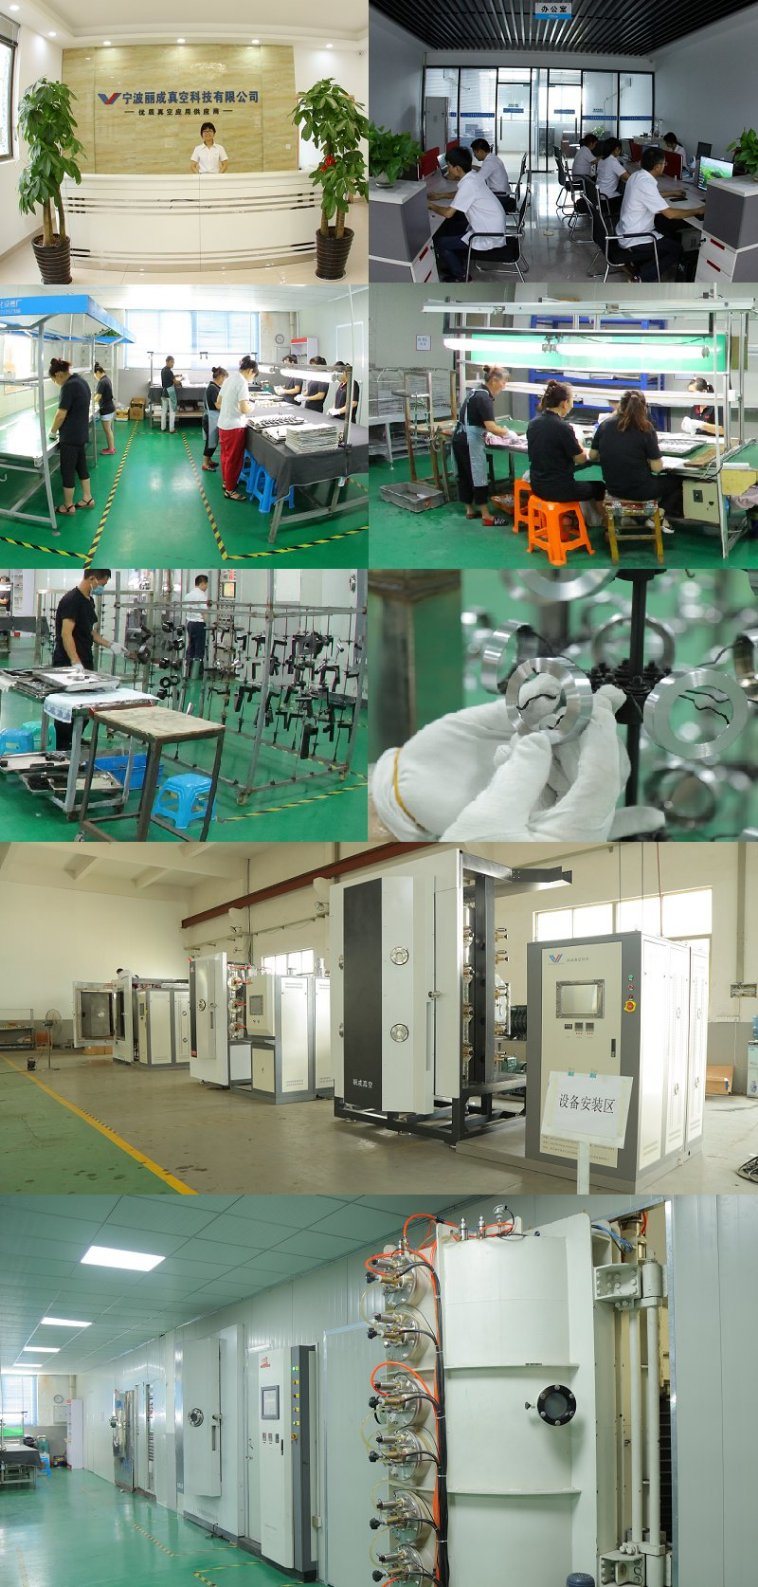 China Factory of Vacuum PVD Gold Nickel/Sliver/Zinc Coating Plant/PVD Coating Machine